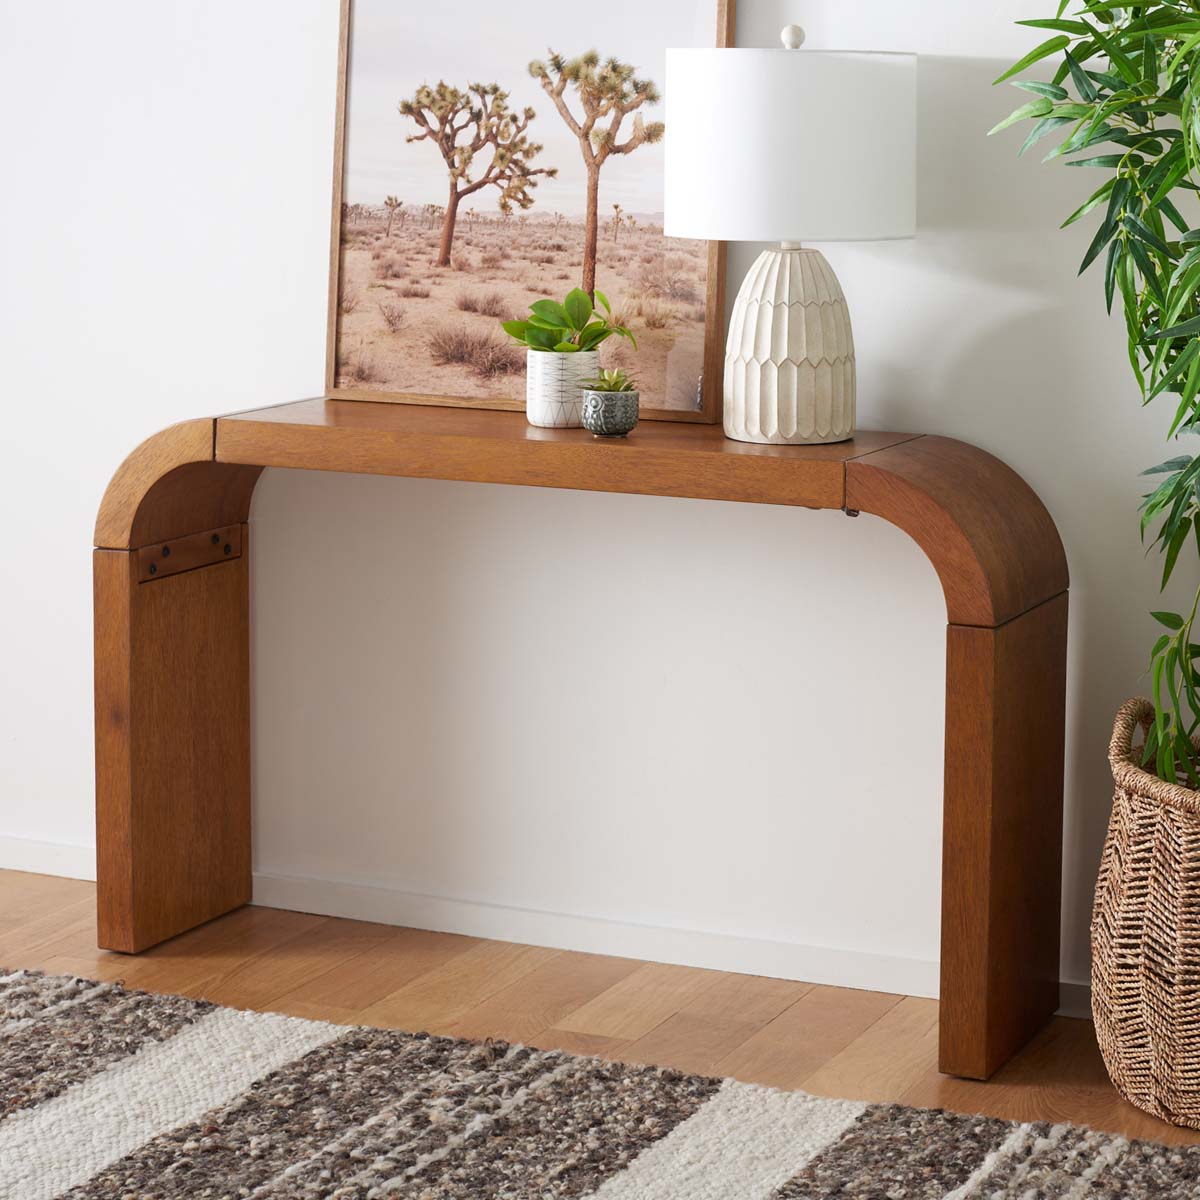 Safavieh Liasonya Curved Console Table , CNS6604 - Natural